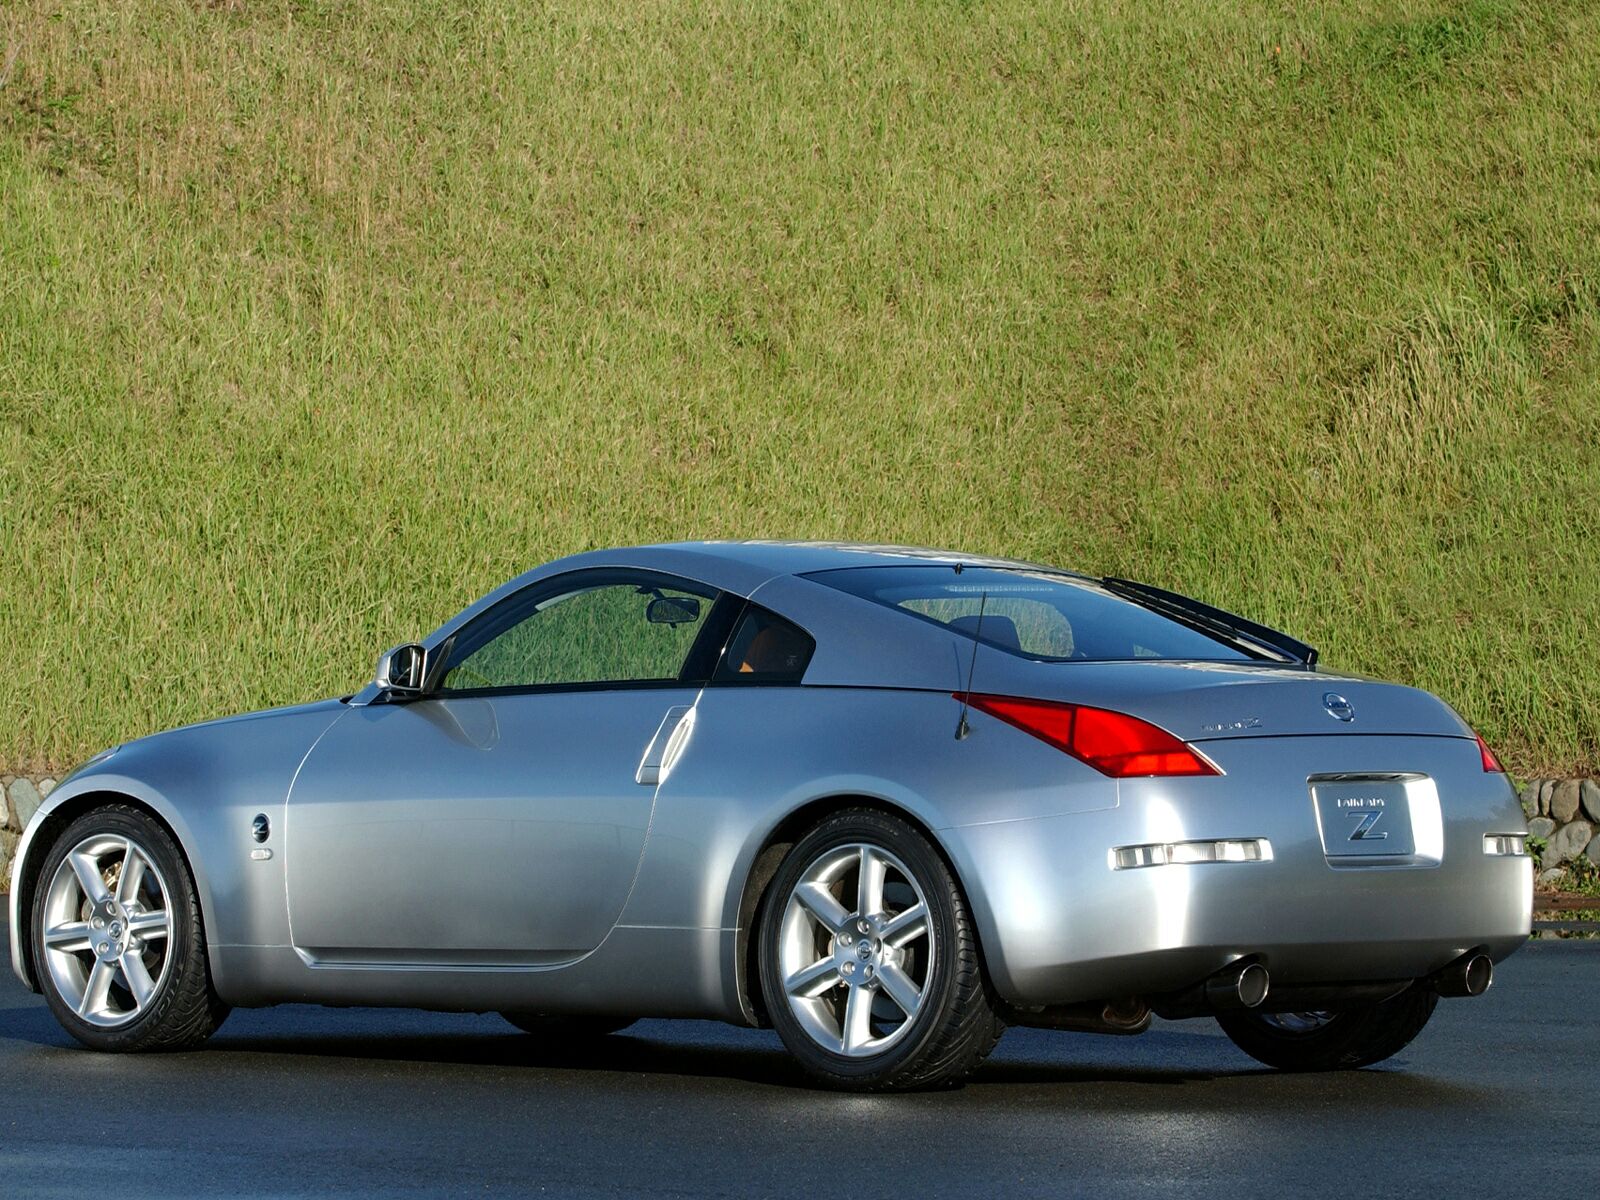 350z And Nissan Laptop Wallpaper Today Related